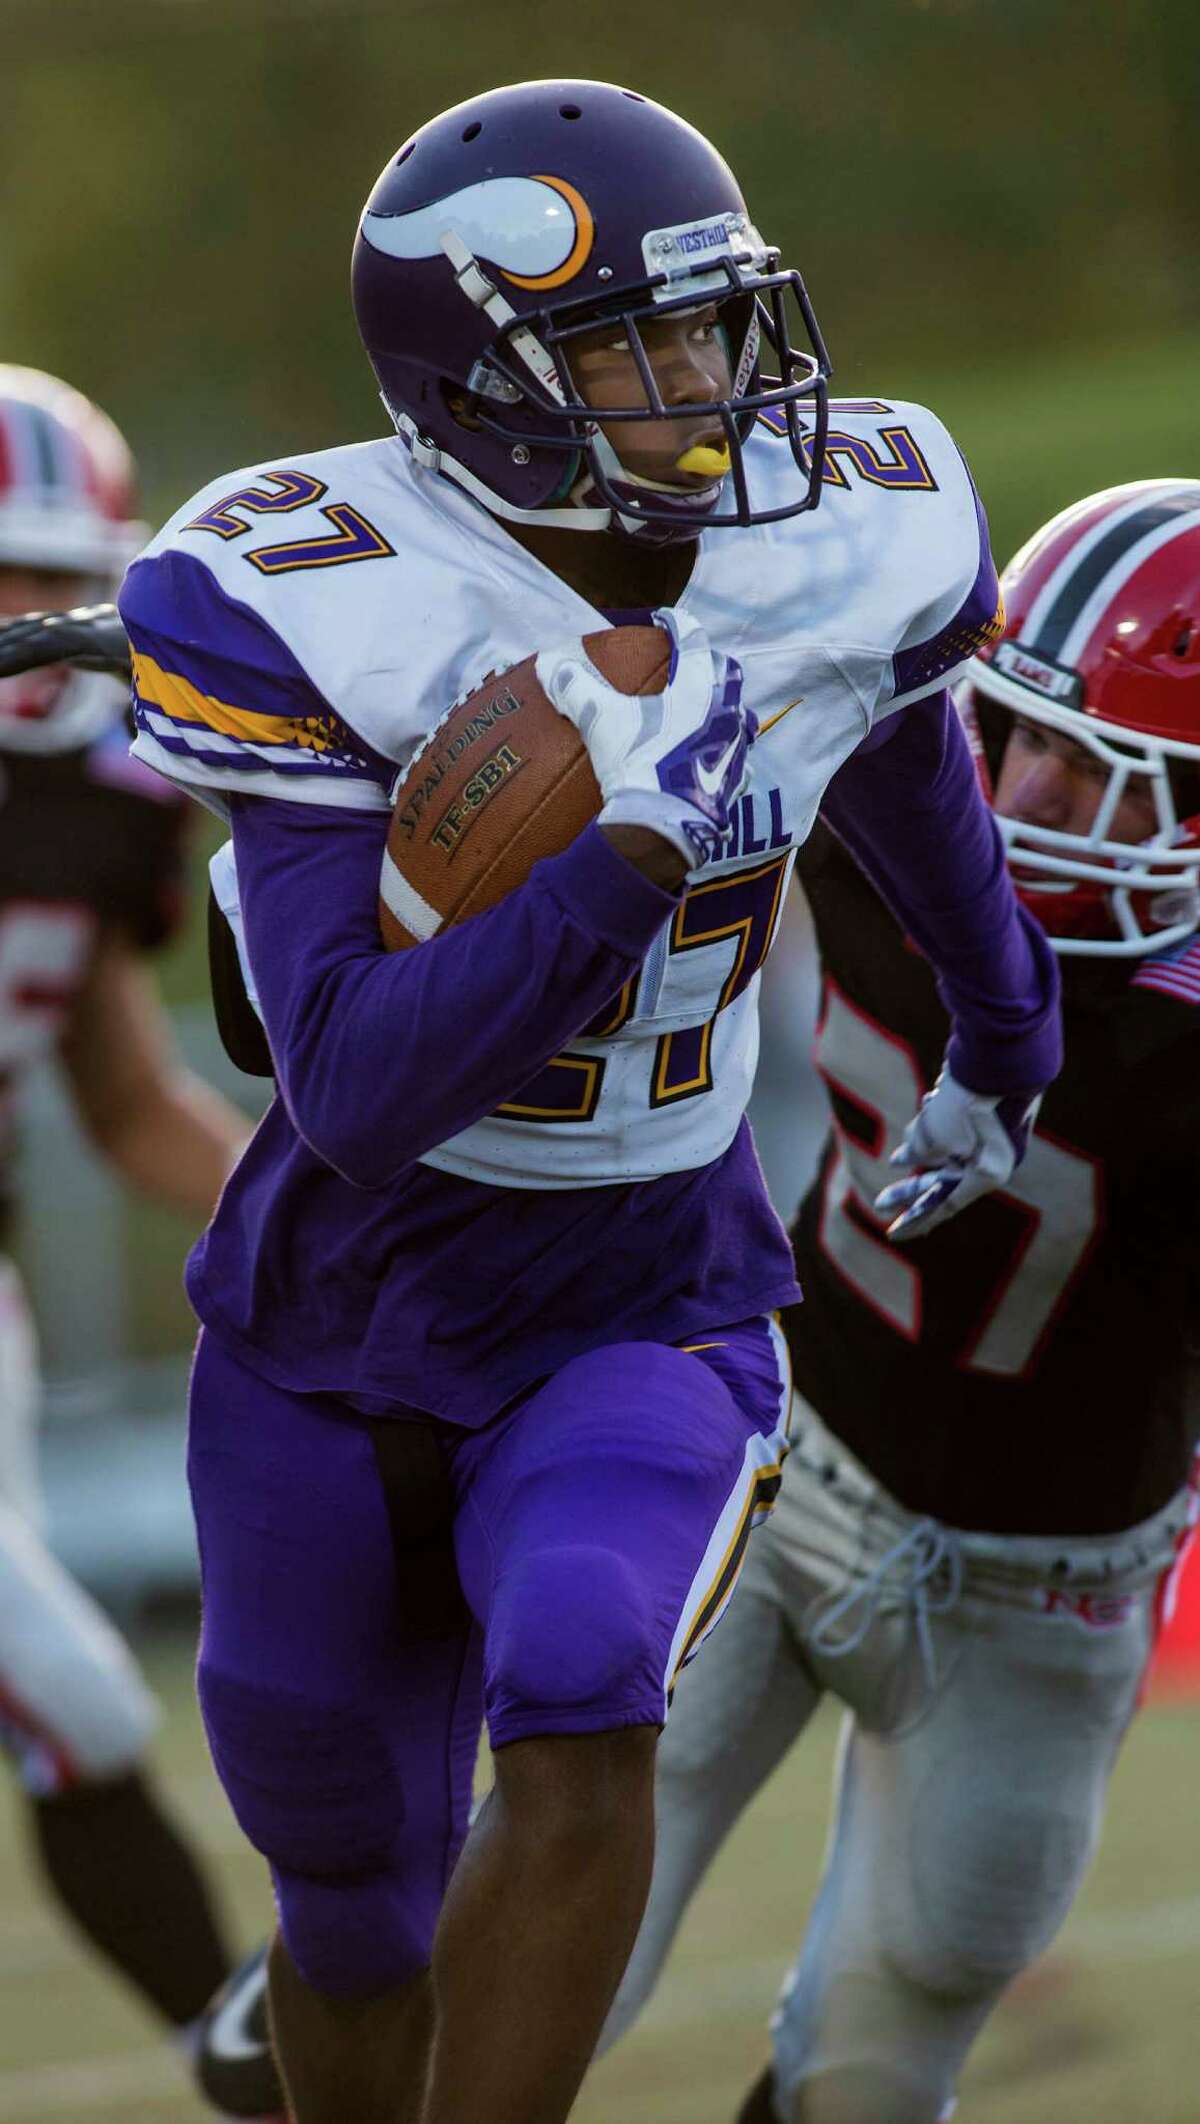 Westhill High School’s Everett Charles Brown runs with the ball against New Canaan High School on Monday.